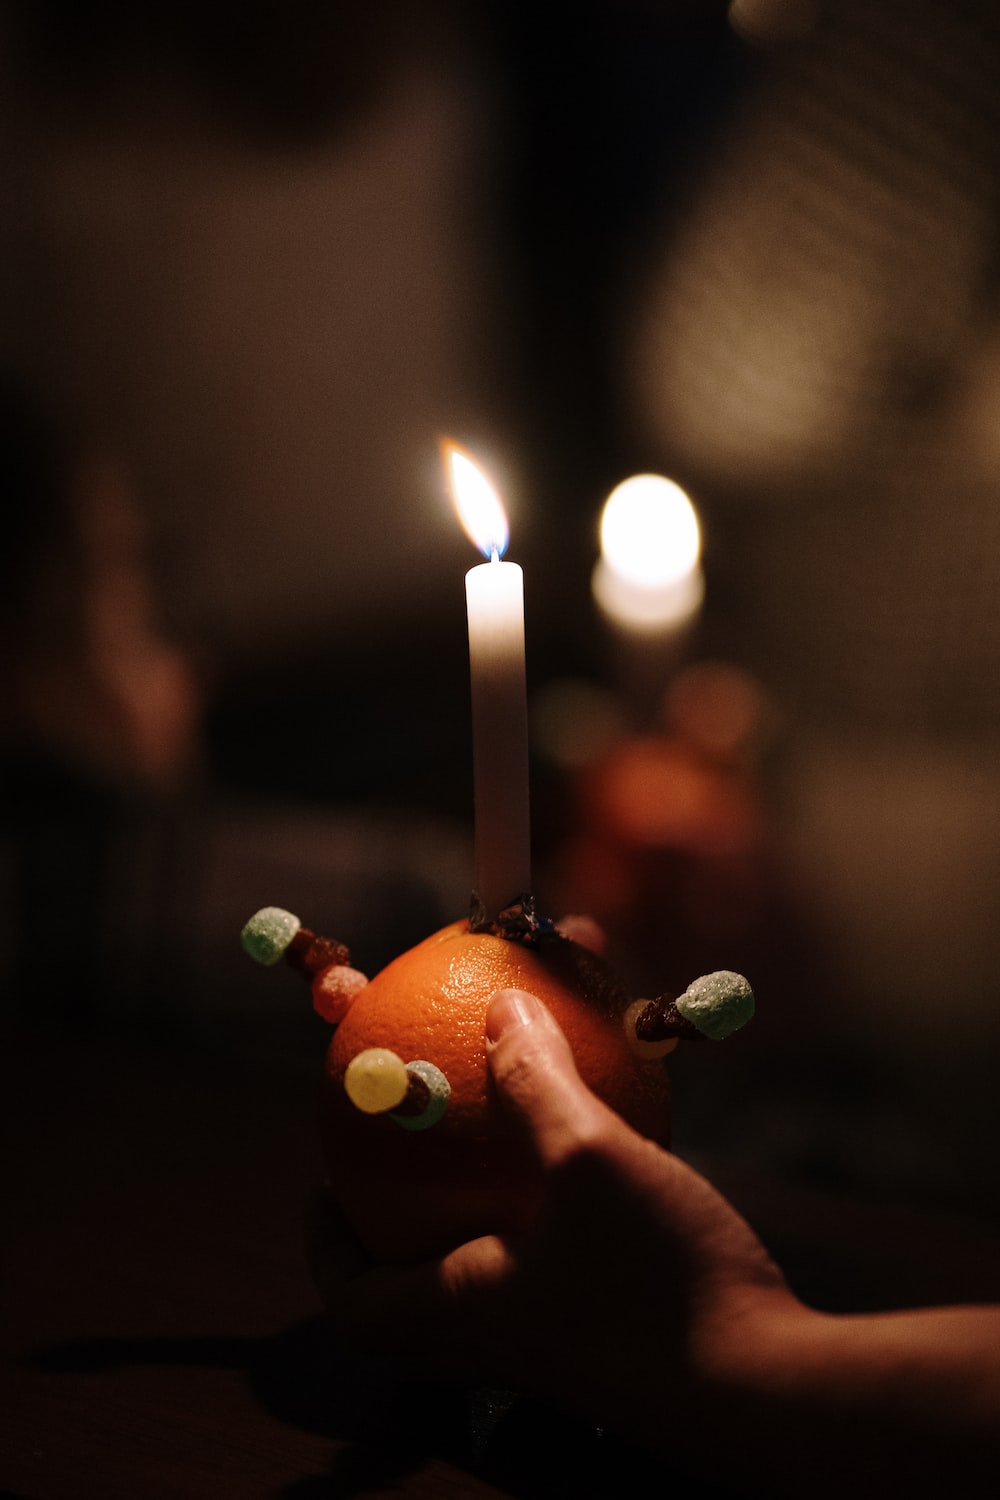 a hand holding an orange with a candle in it